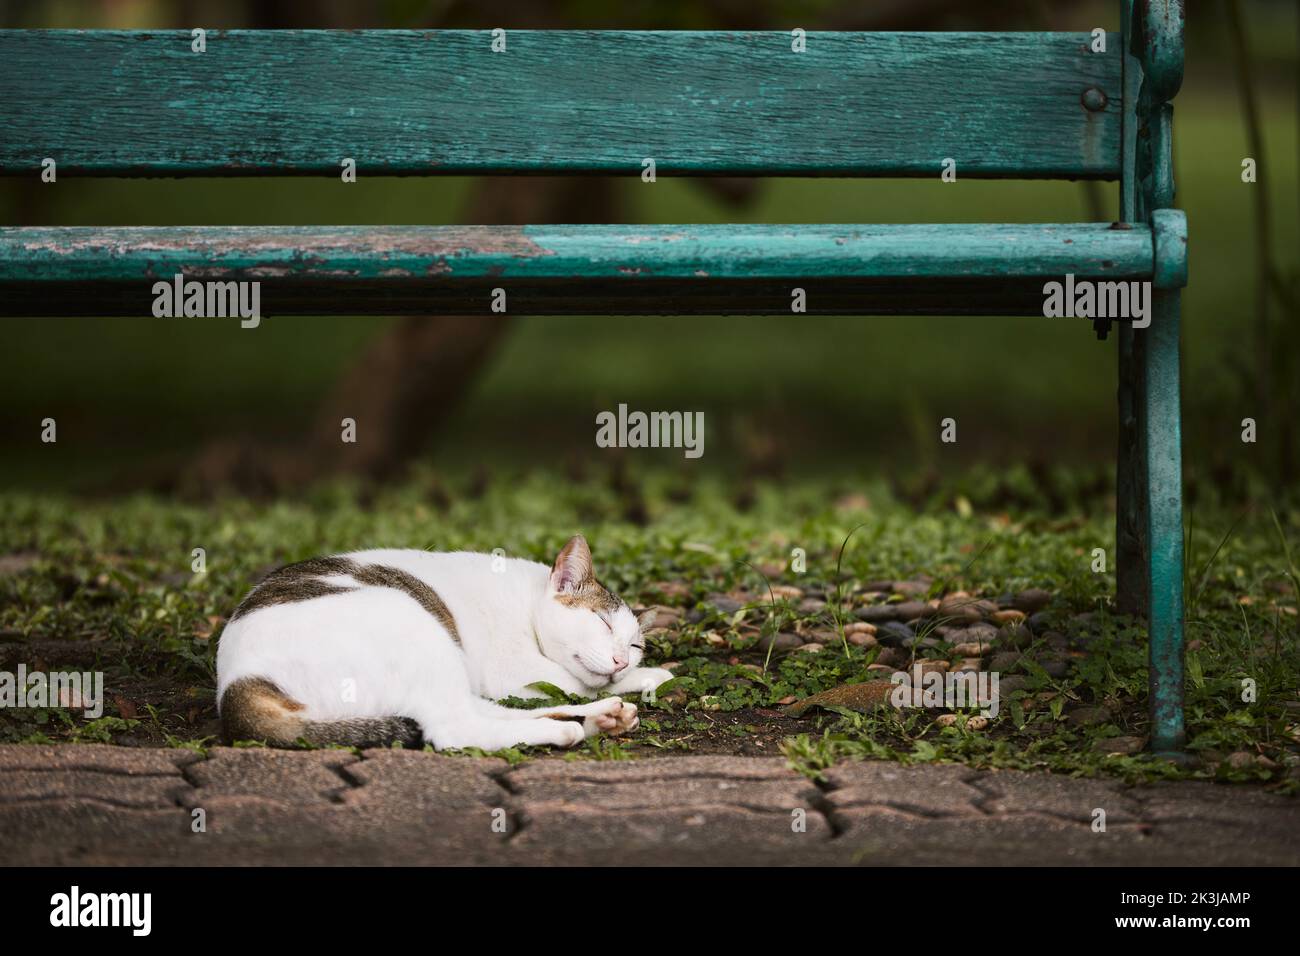 Cute lost cat sleeping under green bench in public park. Stock Photo